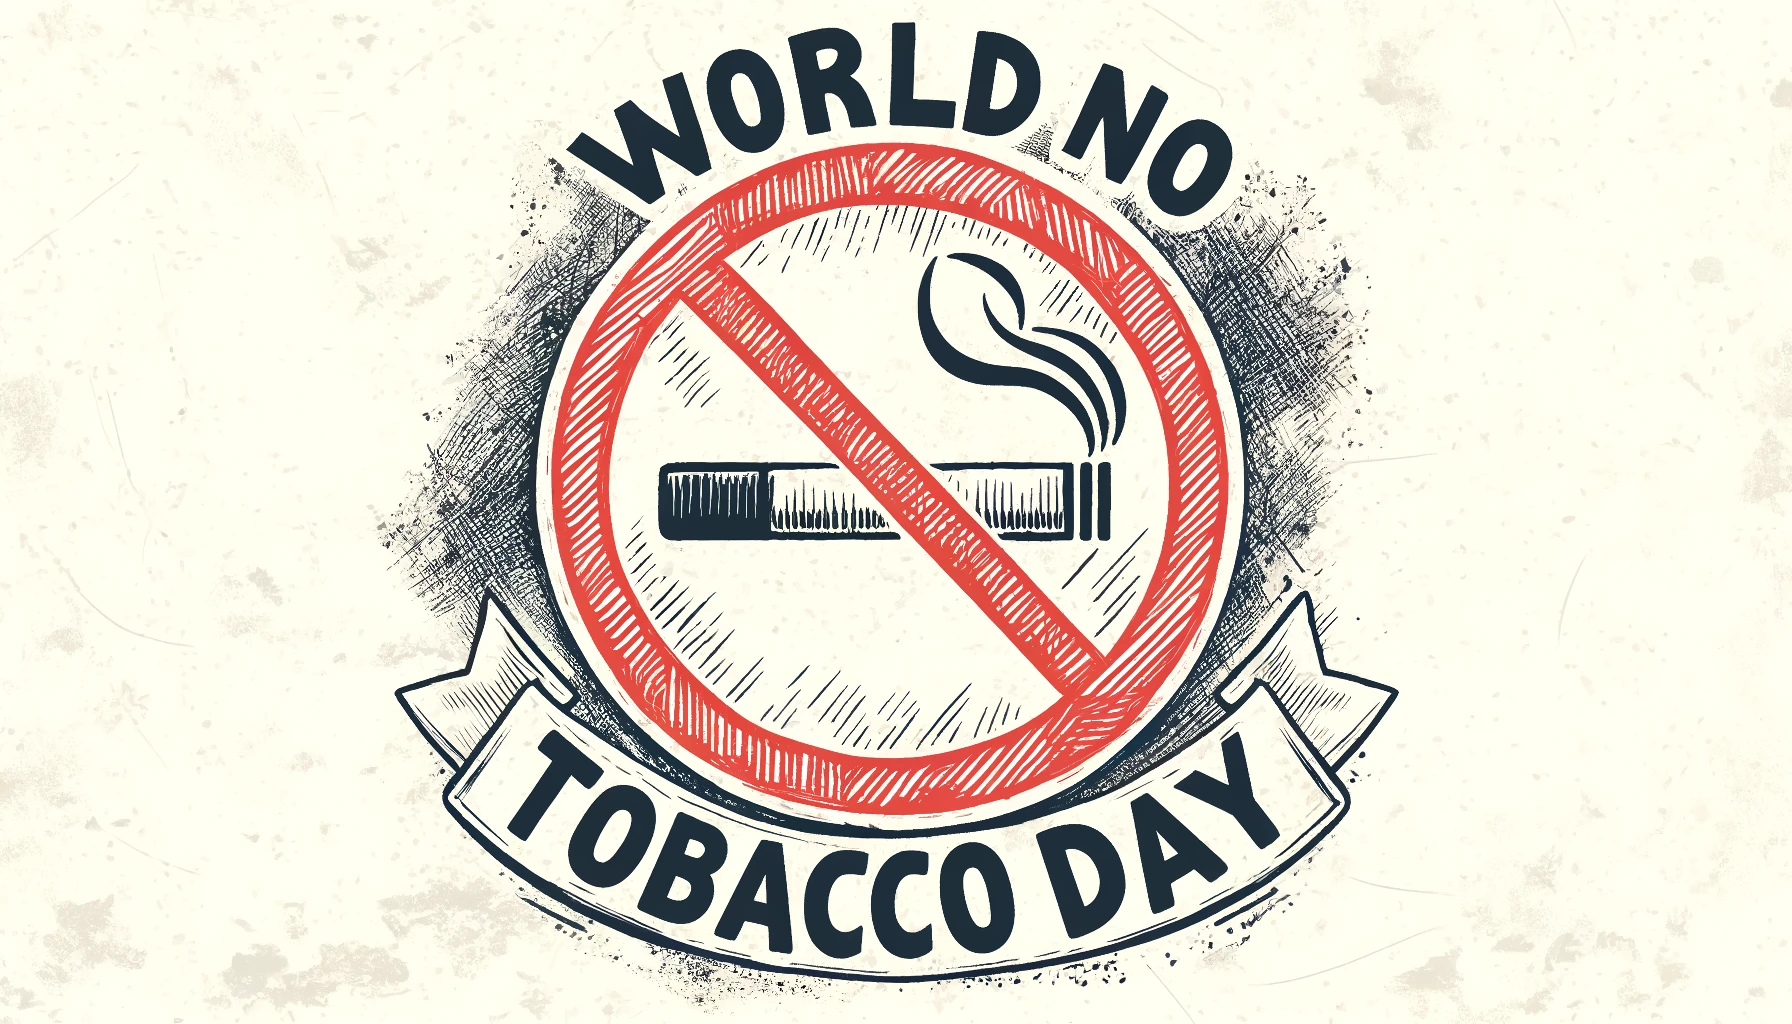 Inspiring World No Tobacco Day Greetings for a Healthy Life